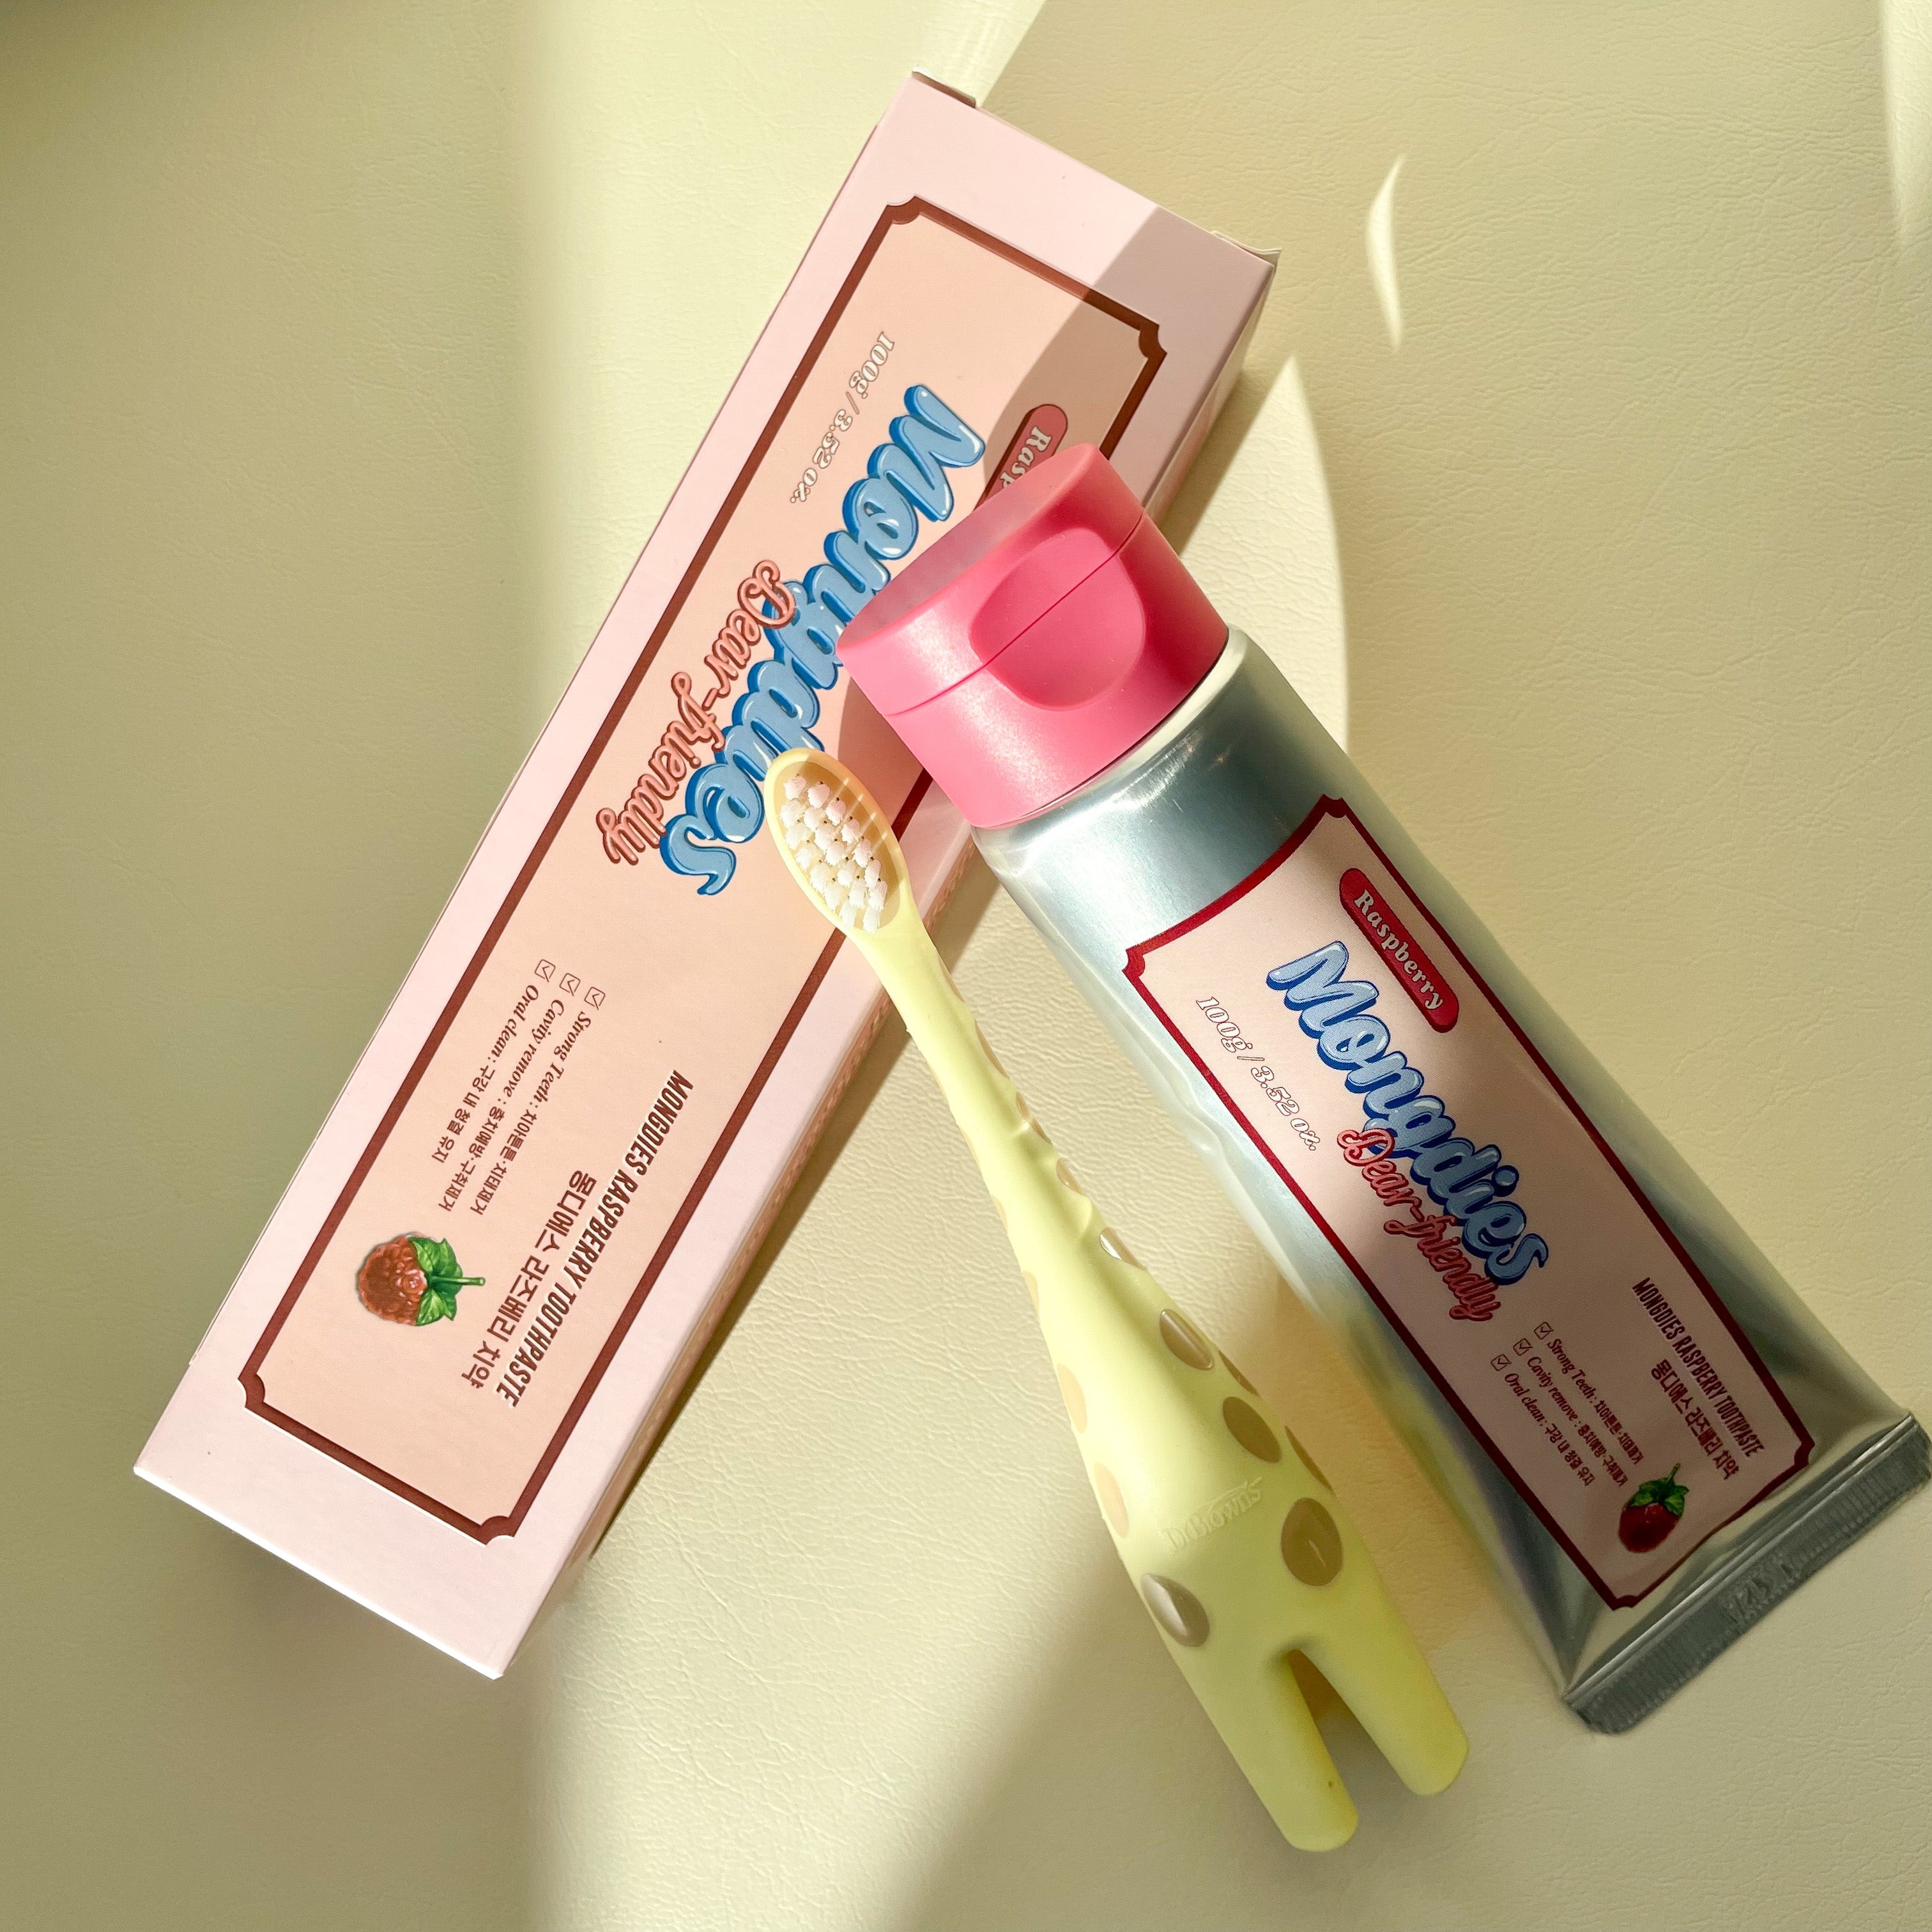 A baby toothpaste up to 3 years old